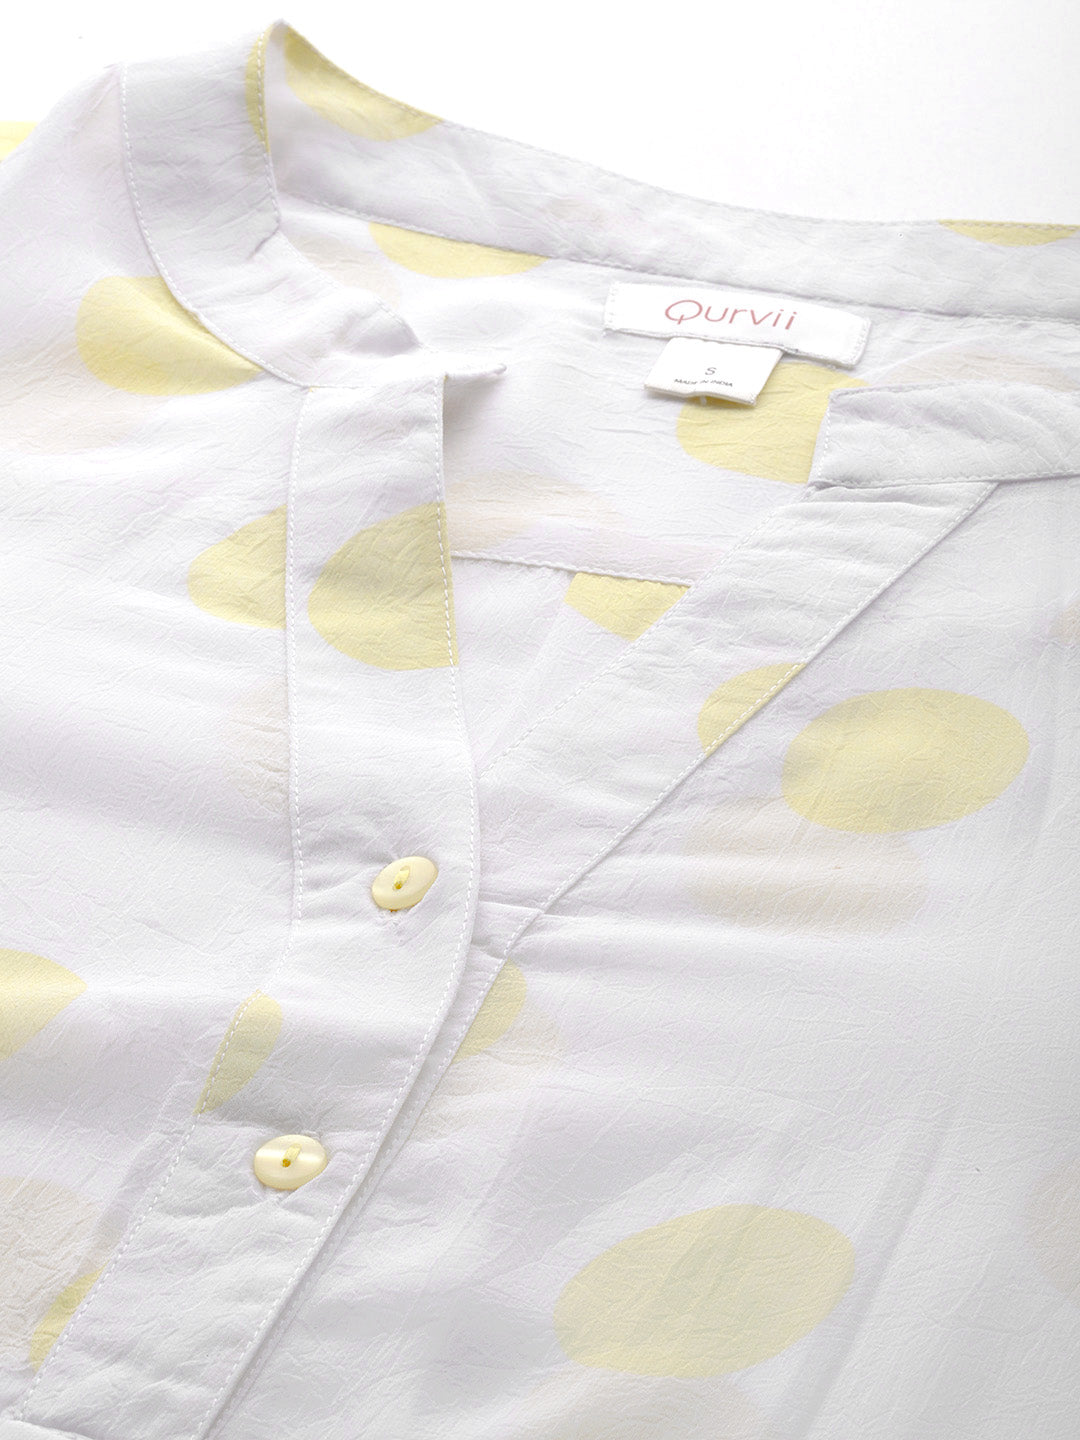 White and yellow polka georgette half placket shirt with full sleeves